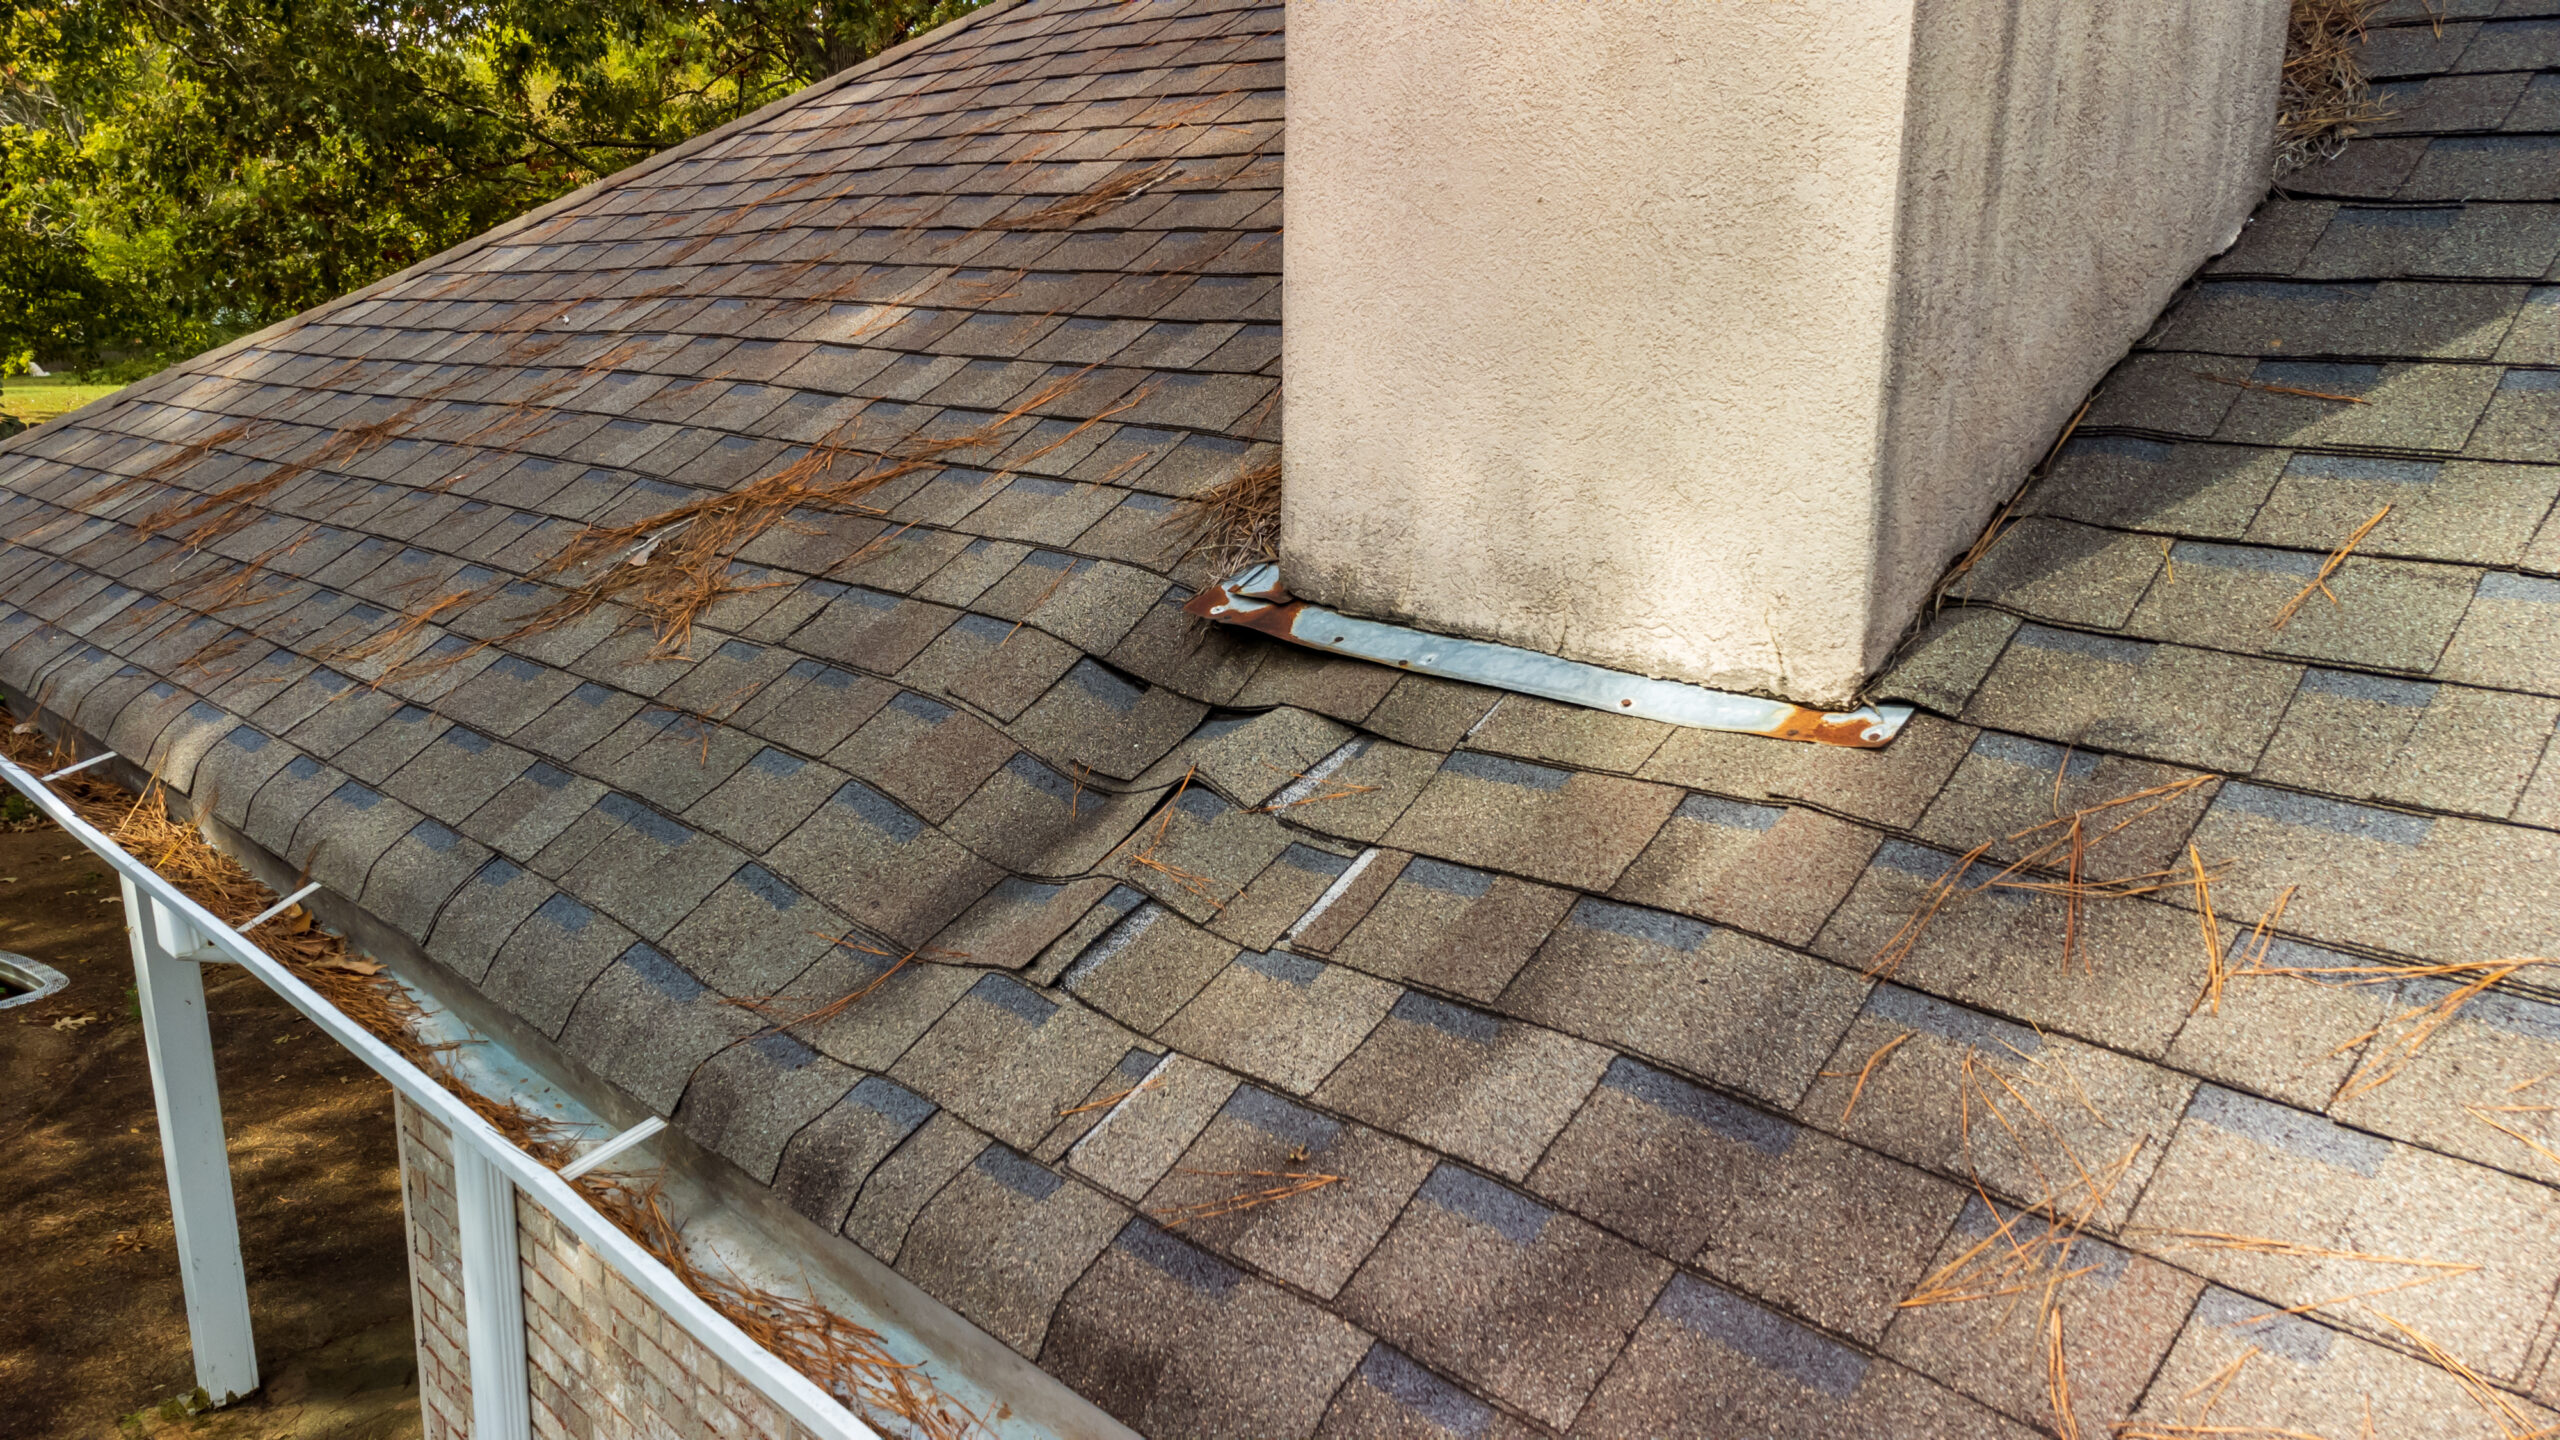 shingles with water damage caused by leak at chimney